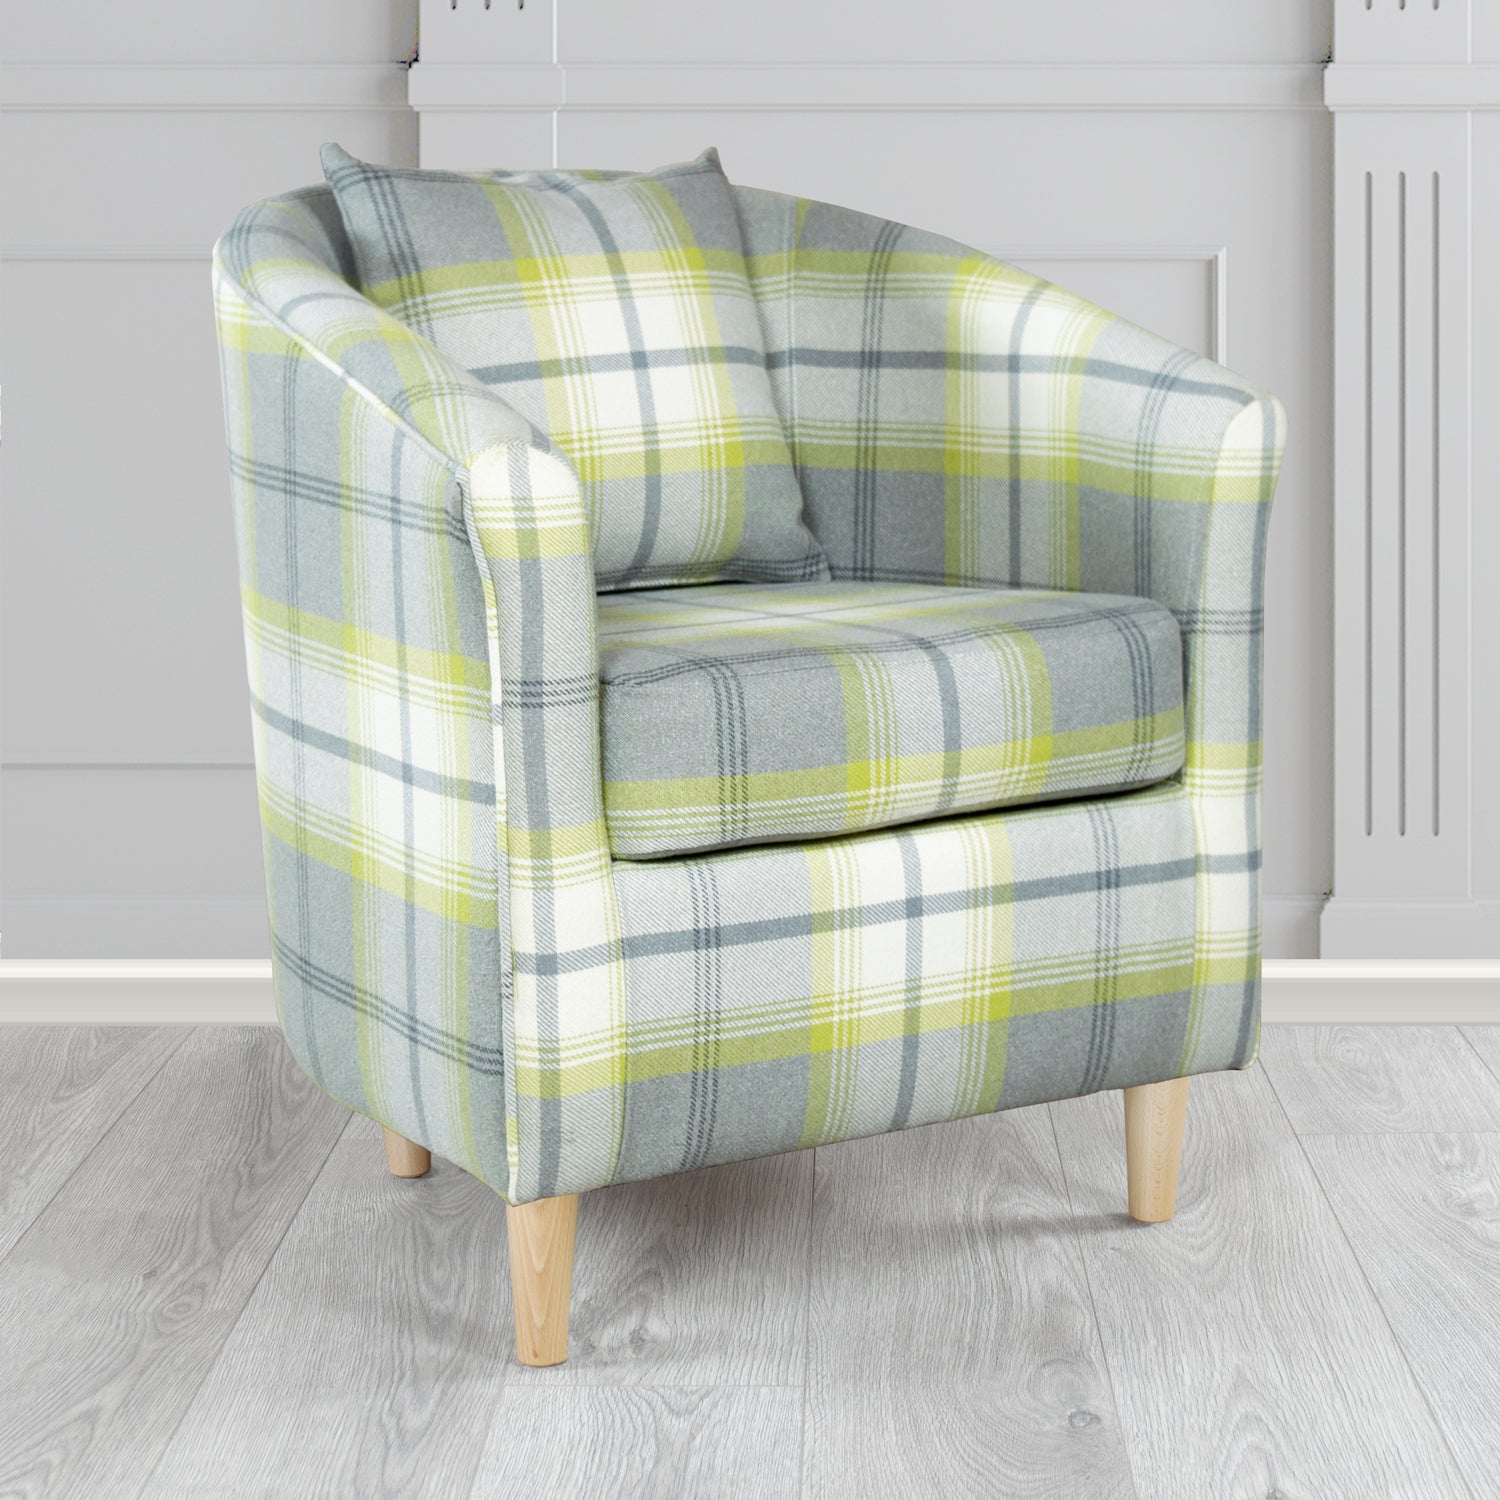 St Tropez Balmoral Citrus Check Tartan Fabric Tub Chair with Scatter Cushion (6627053240362)